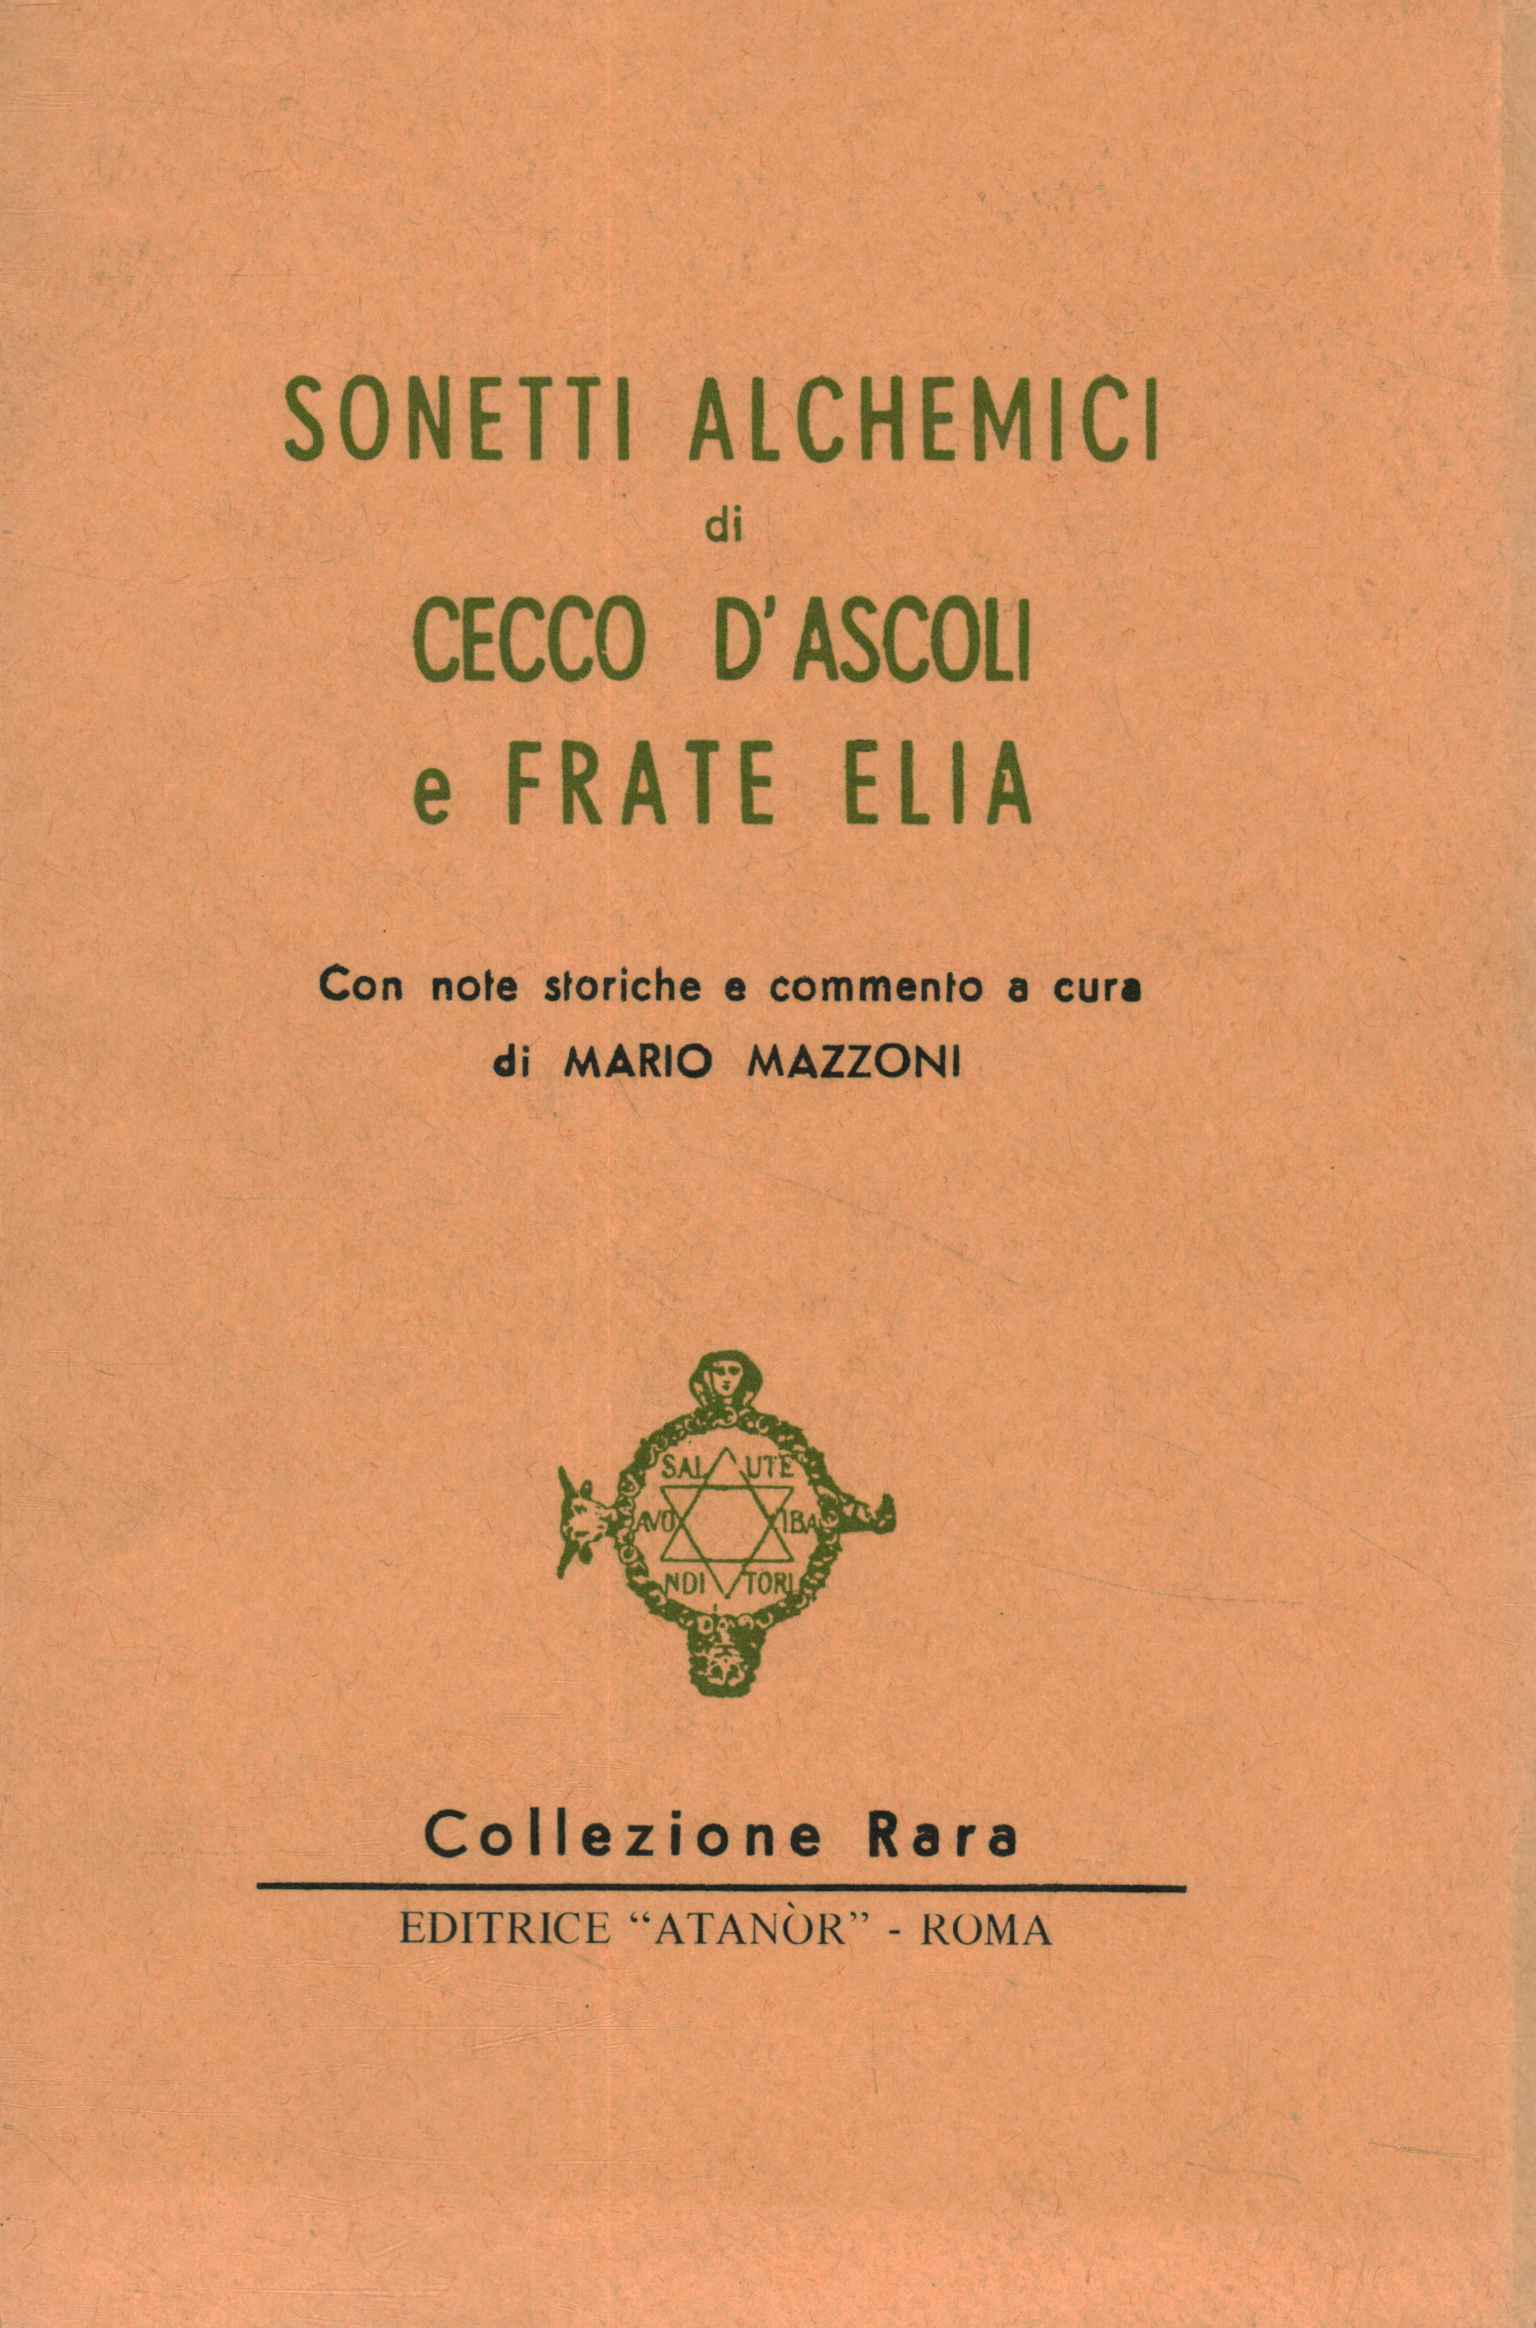 Alchemical sonnets by Cecco d'As